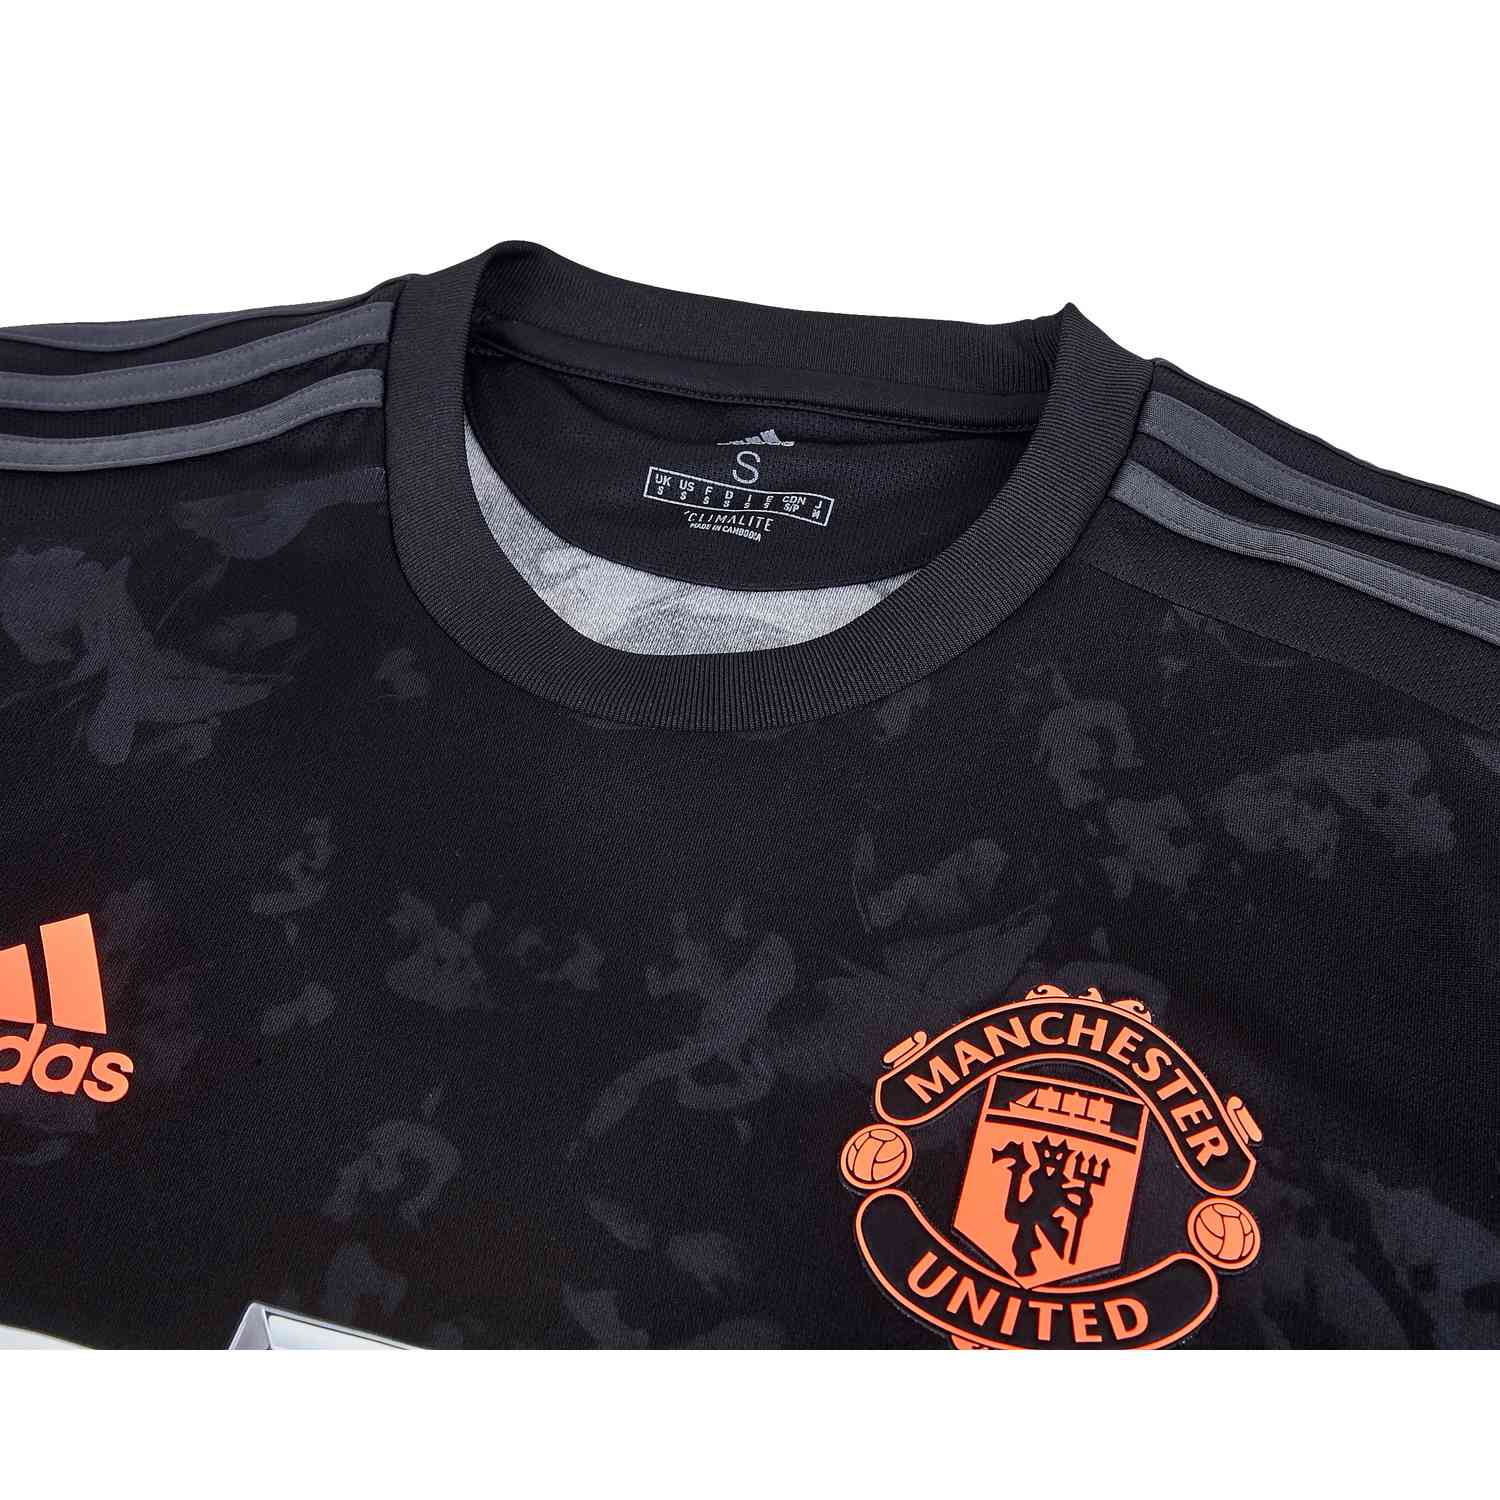 2019/20 adidas Manchester United Home Jersey - Soccer Master